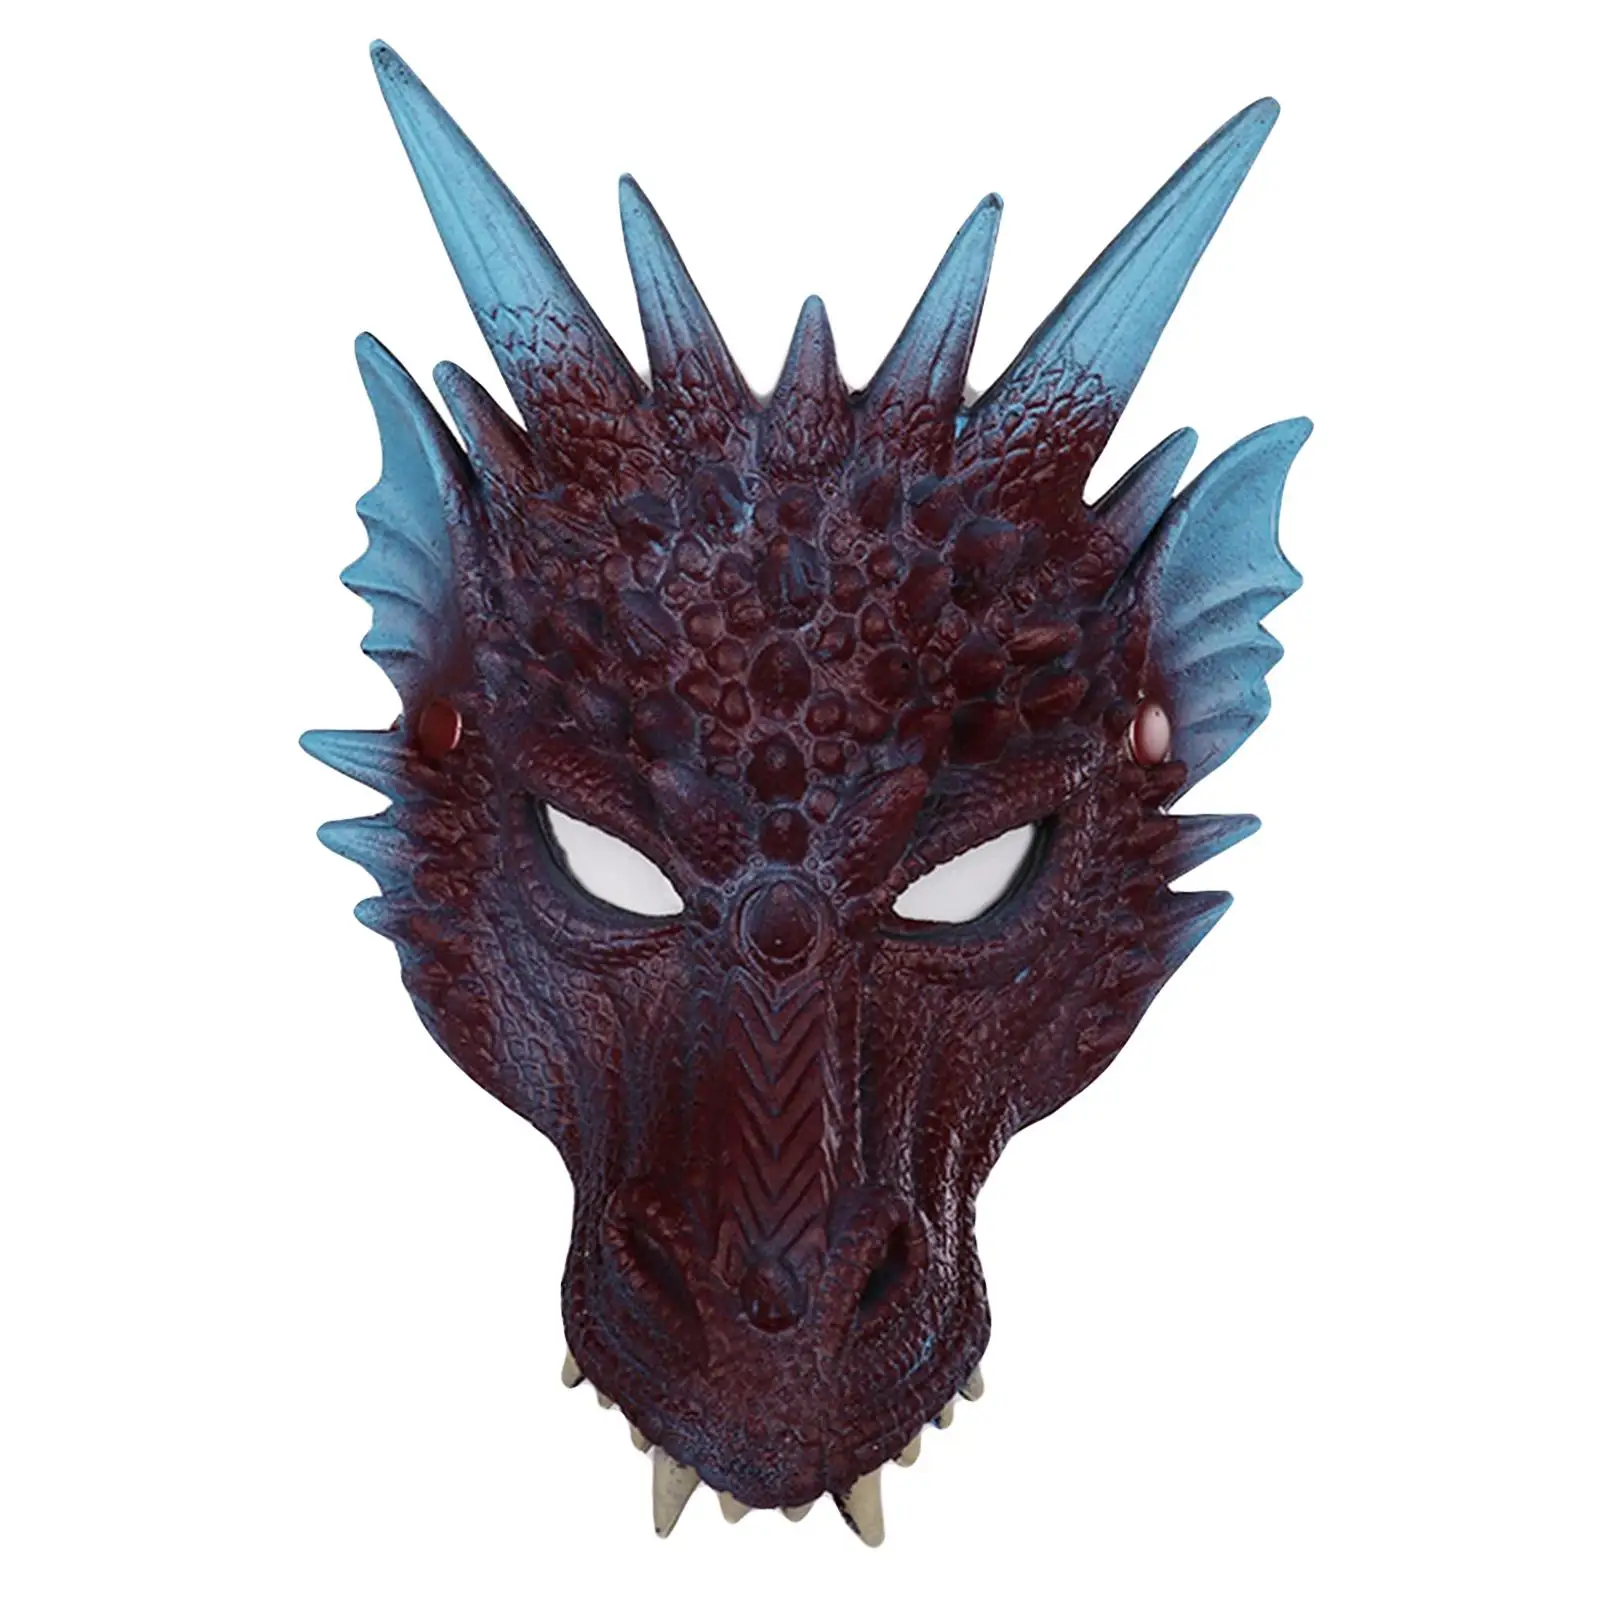  Dragon  Full Overhead Cover for Adults Women  Masquerade Fancy Dress